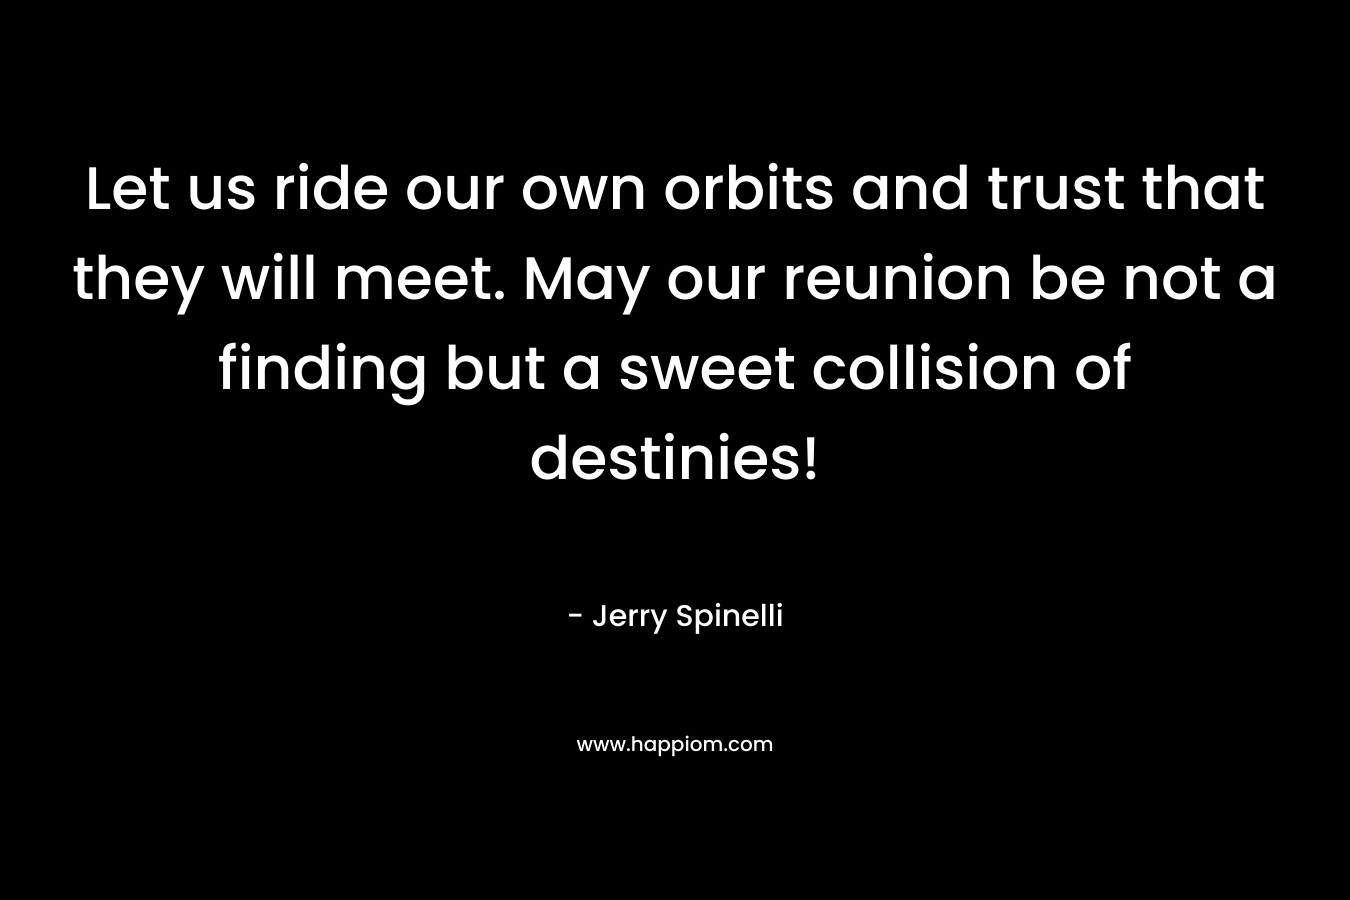 Let us ride our own orbits and trust that they will meet. May our reunion be not a finding but a sweet collision of destinies! – Jerry Spinelli